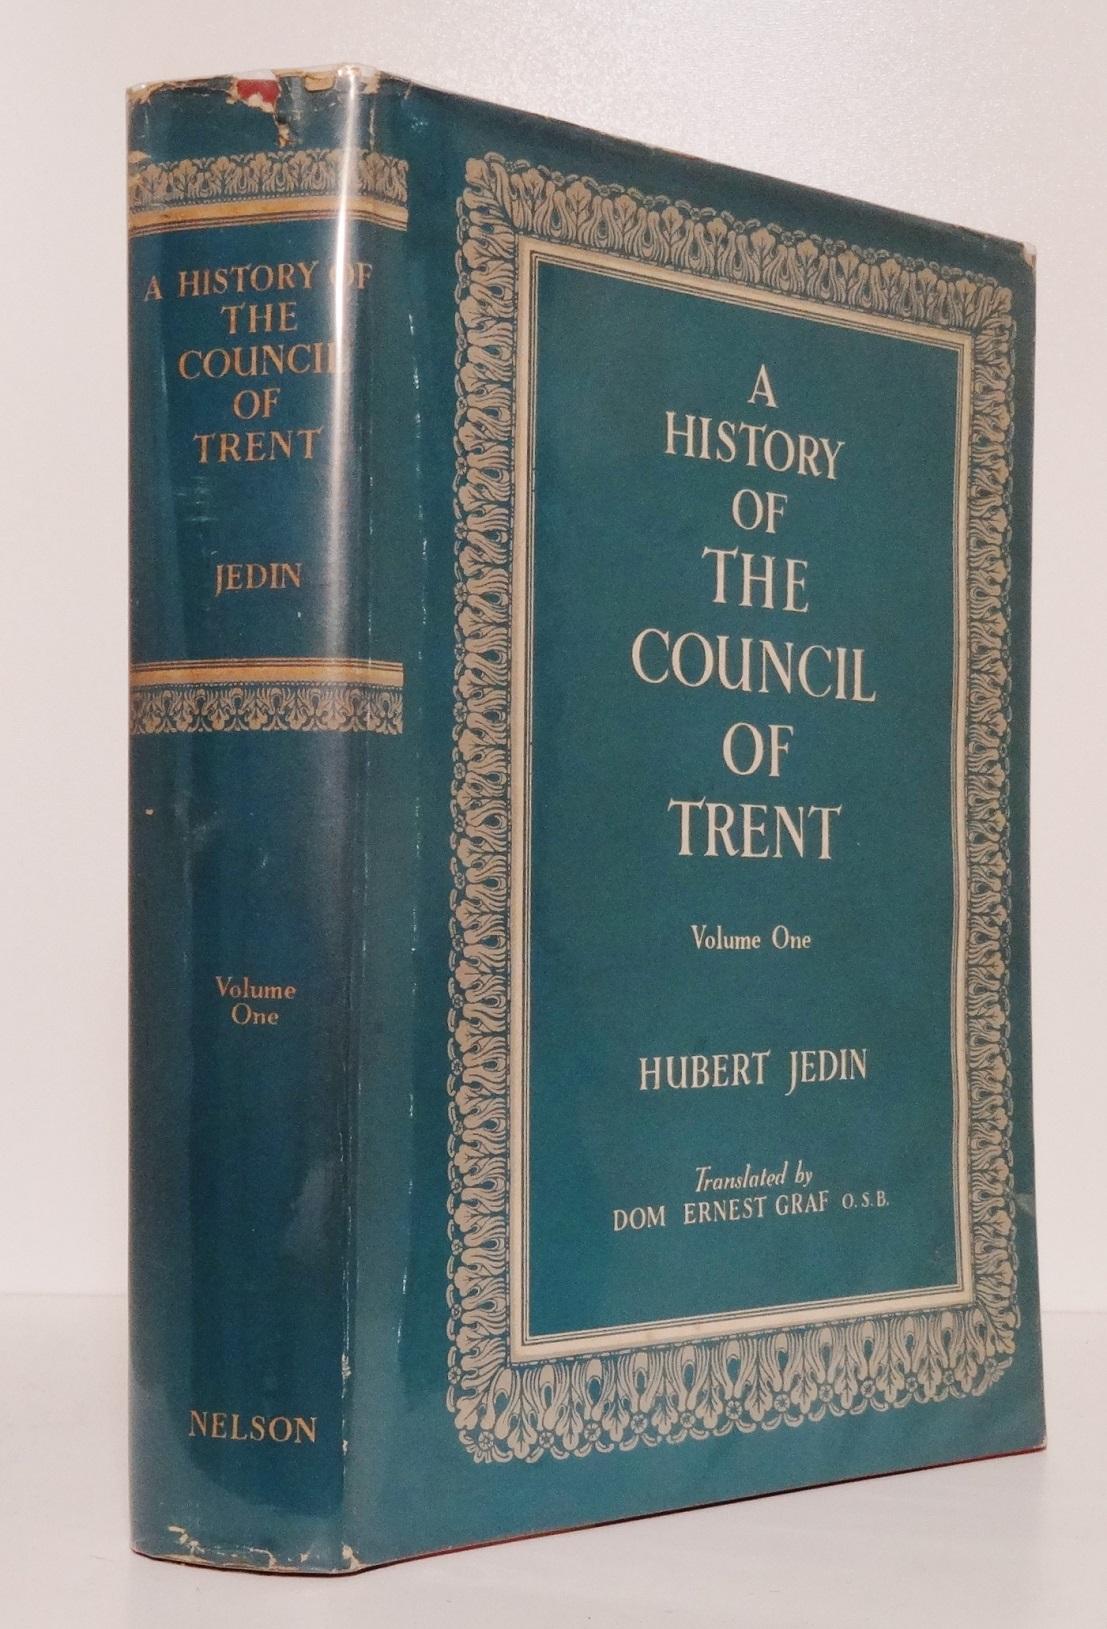 A HISTORY OF THE COUNCIL OF TRENT: VOLUME I - JEDIN, Hubert, trans. Ernest Graf